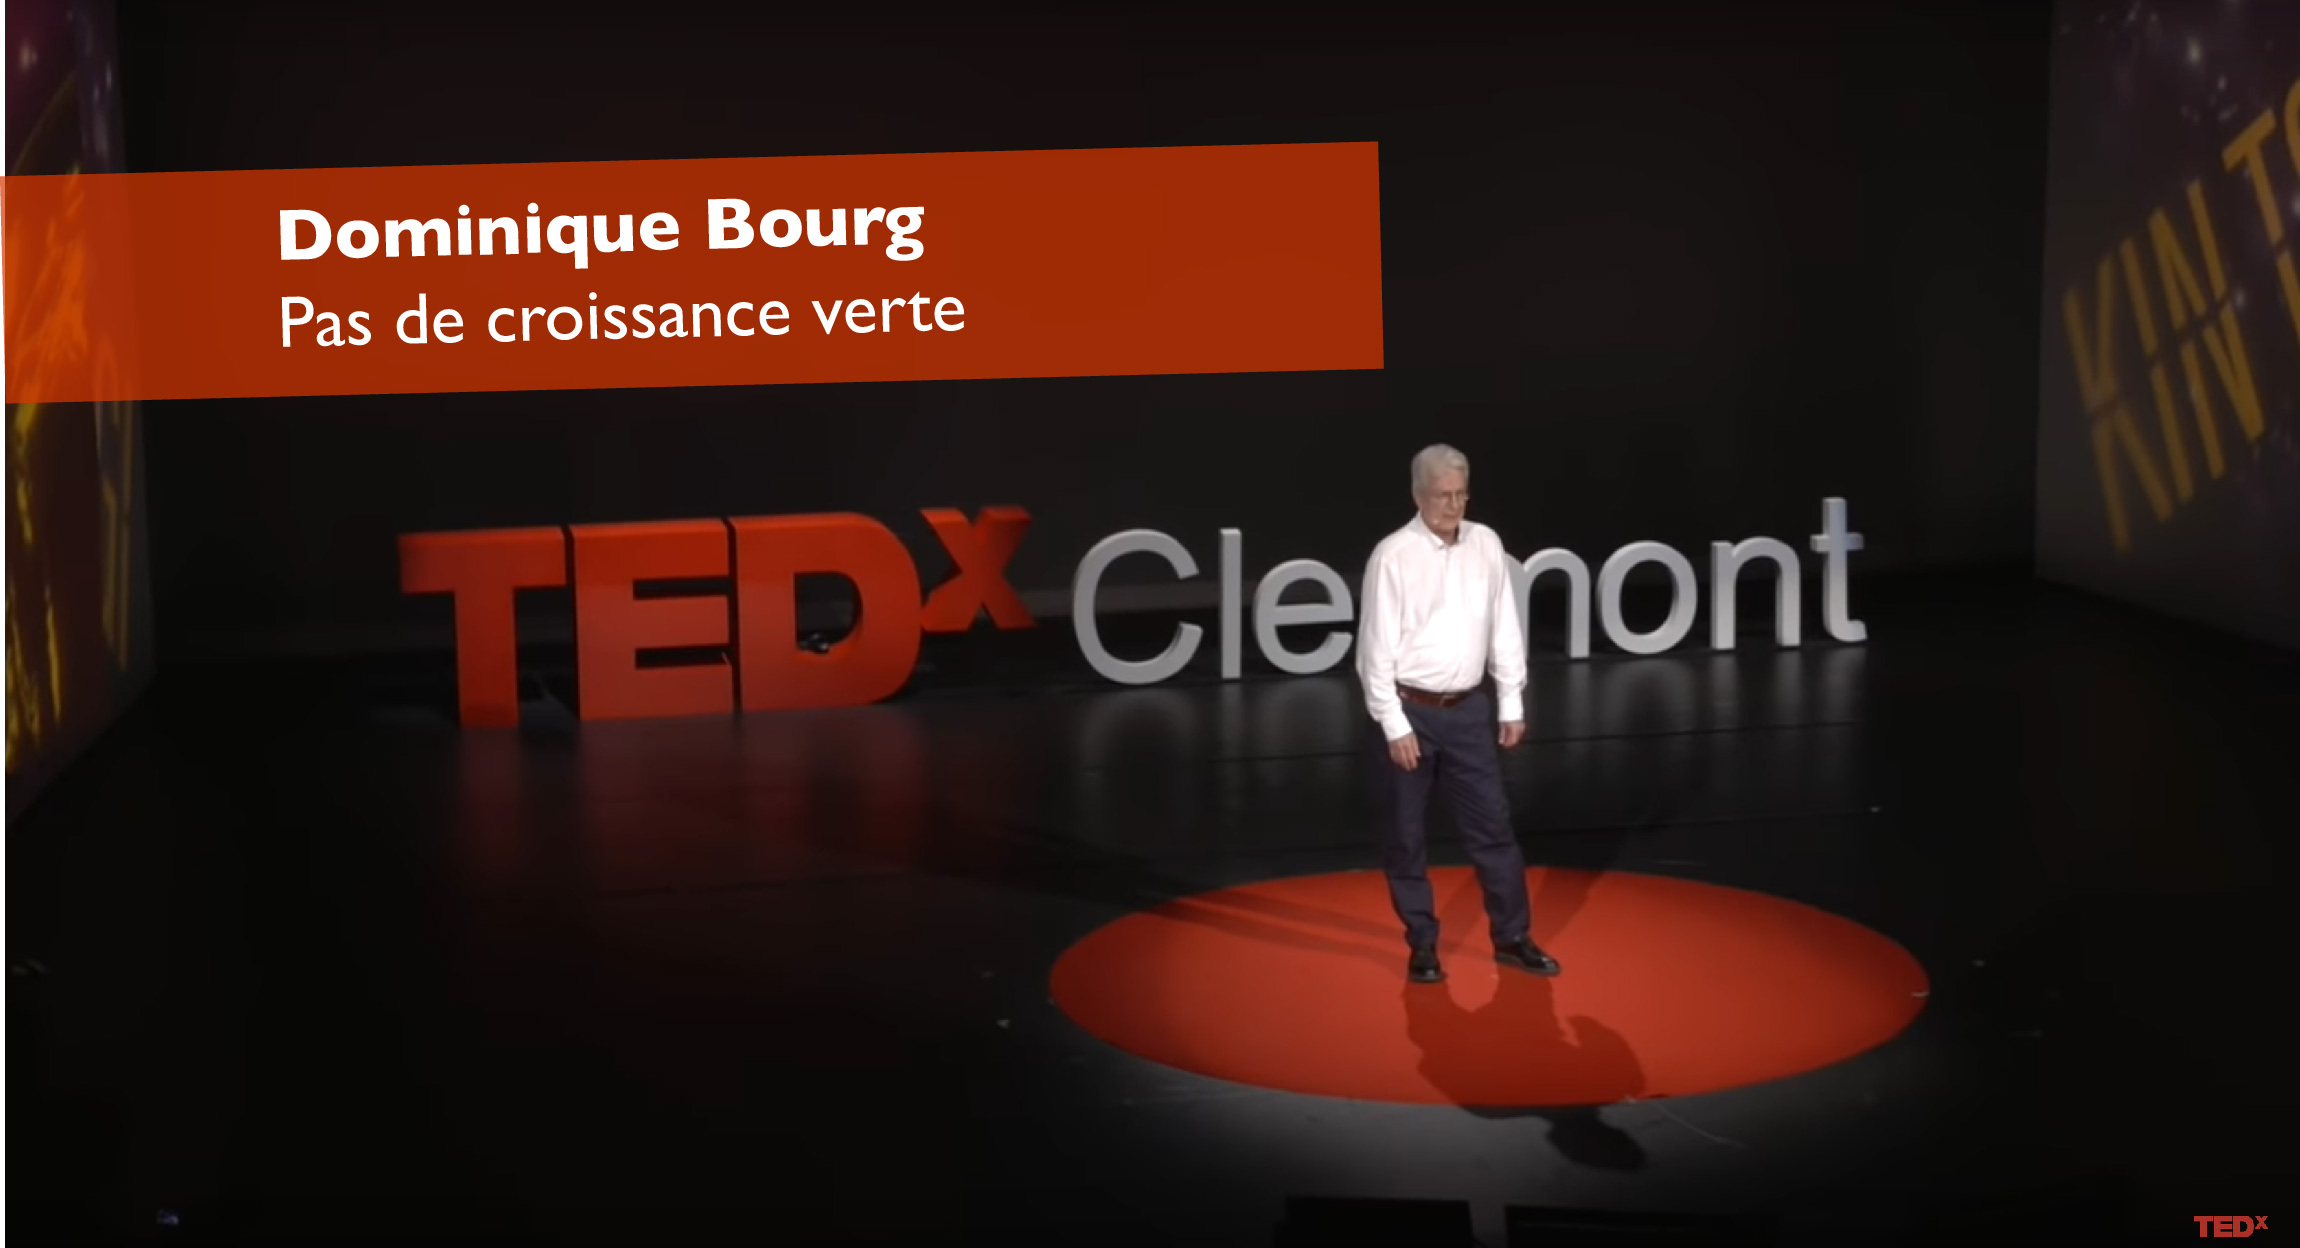 You are currently viewing Oublions nos rêves de « croissance verte » – Dominique BOURG